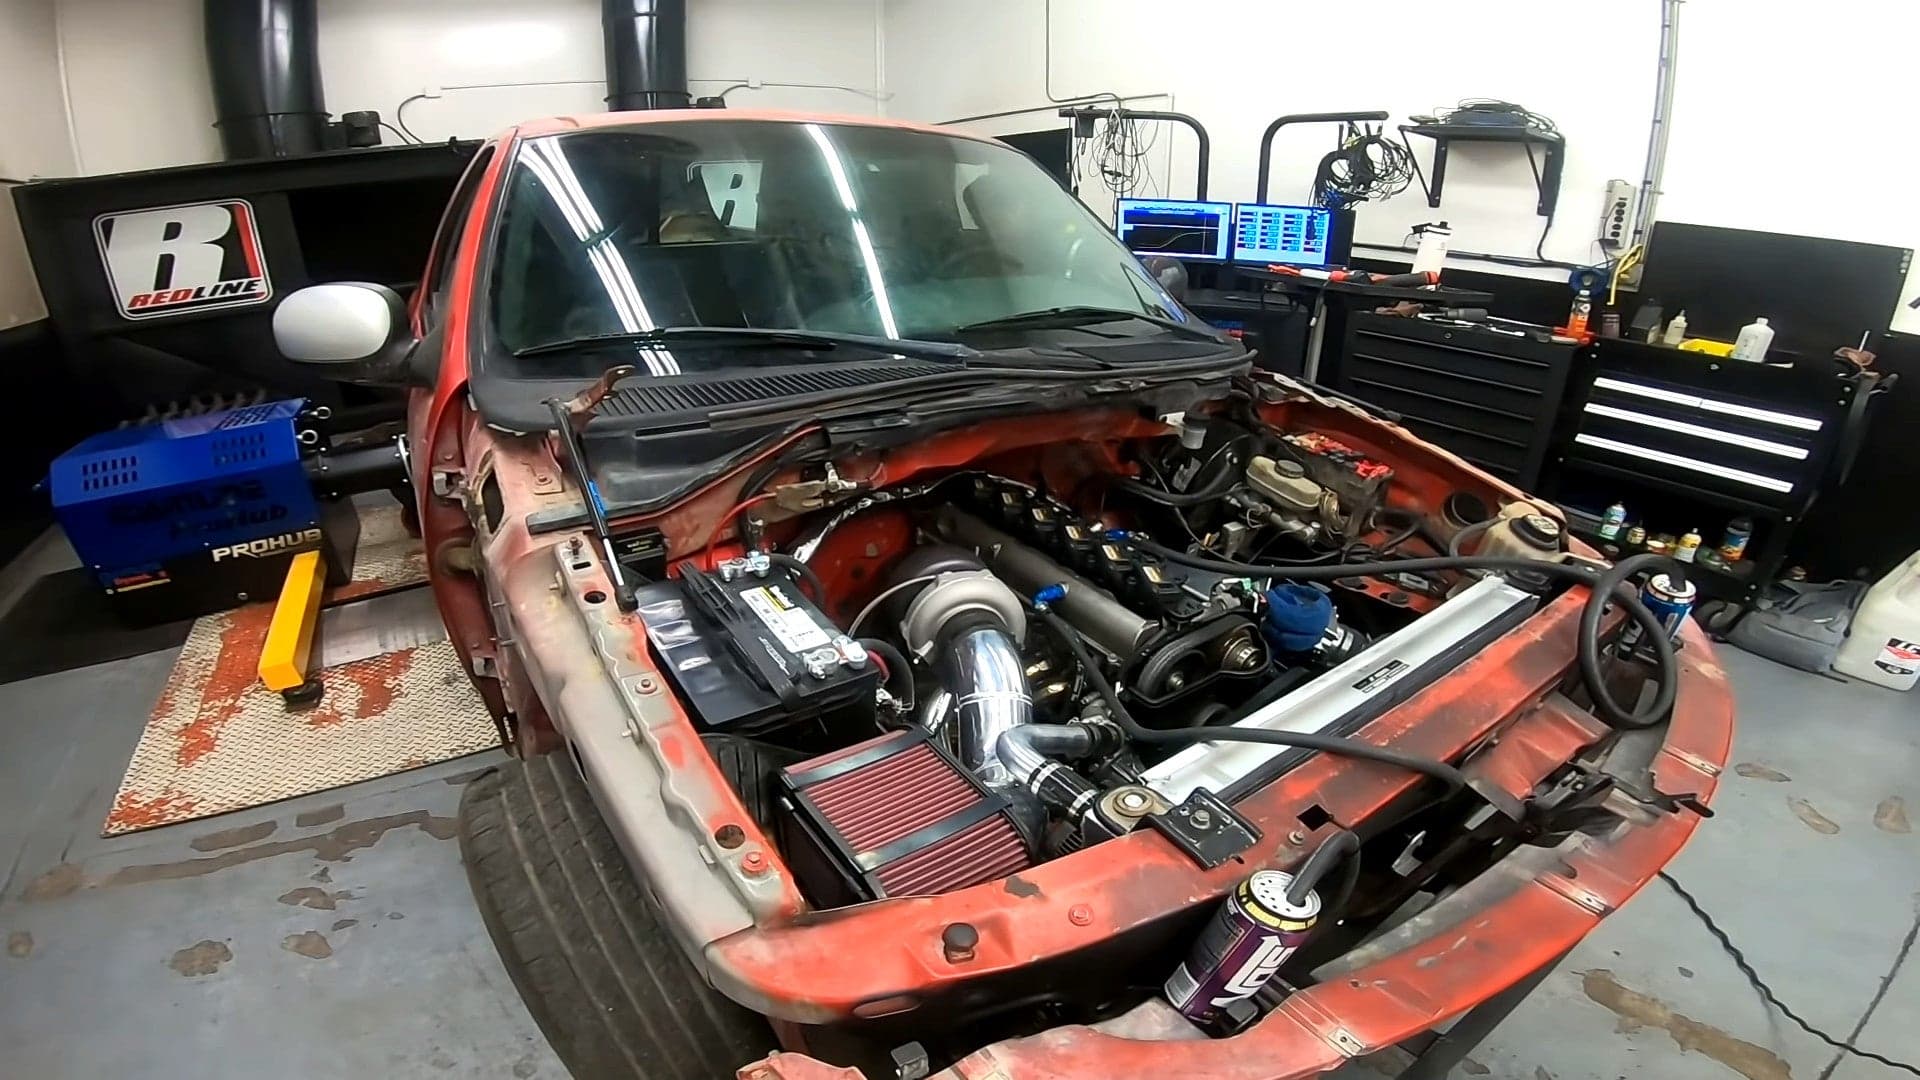 Hoonigan’s 2JZ Swapped F-150 Shop Truck Is a Fast & Furious Tribute Build